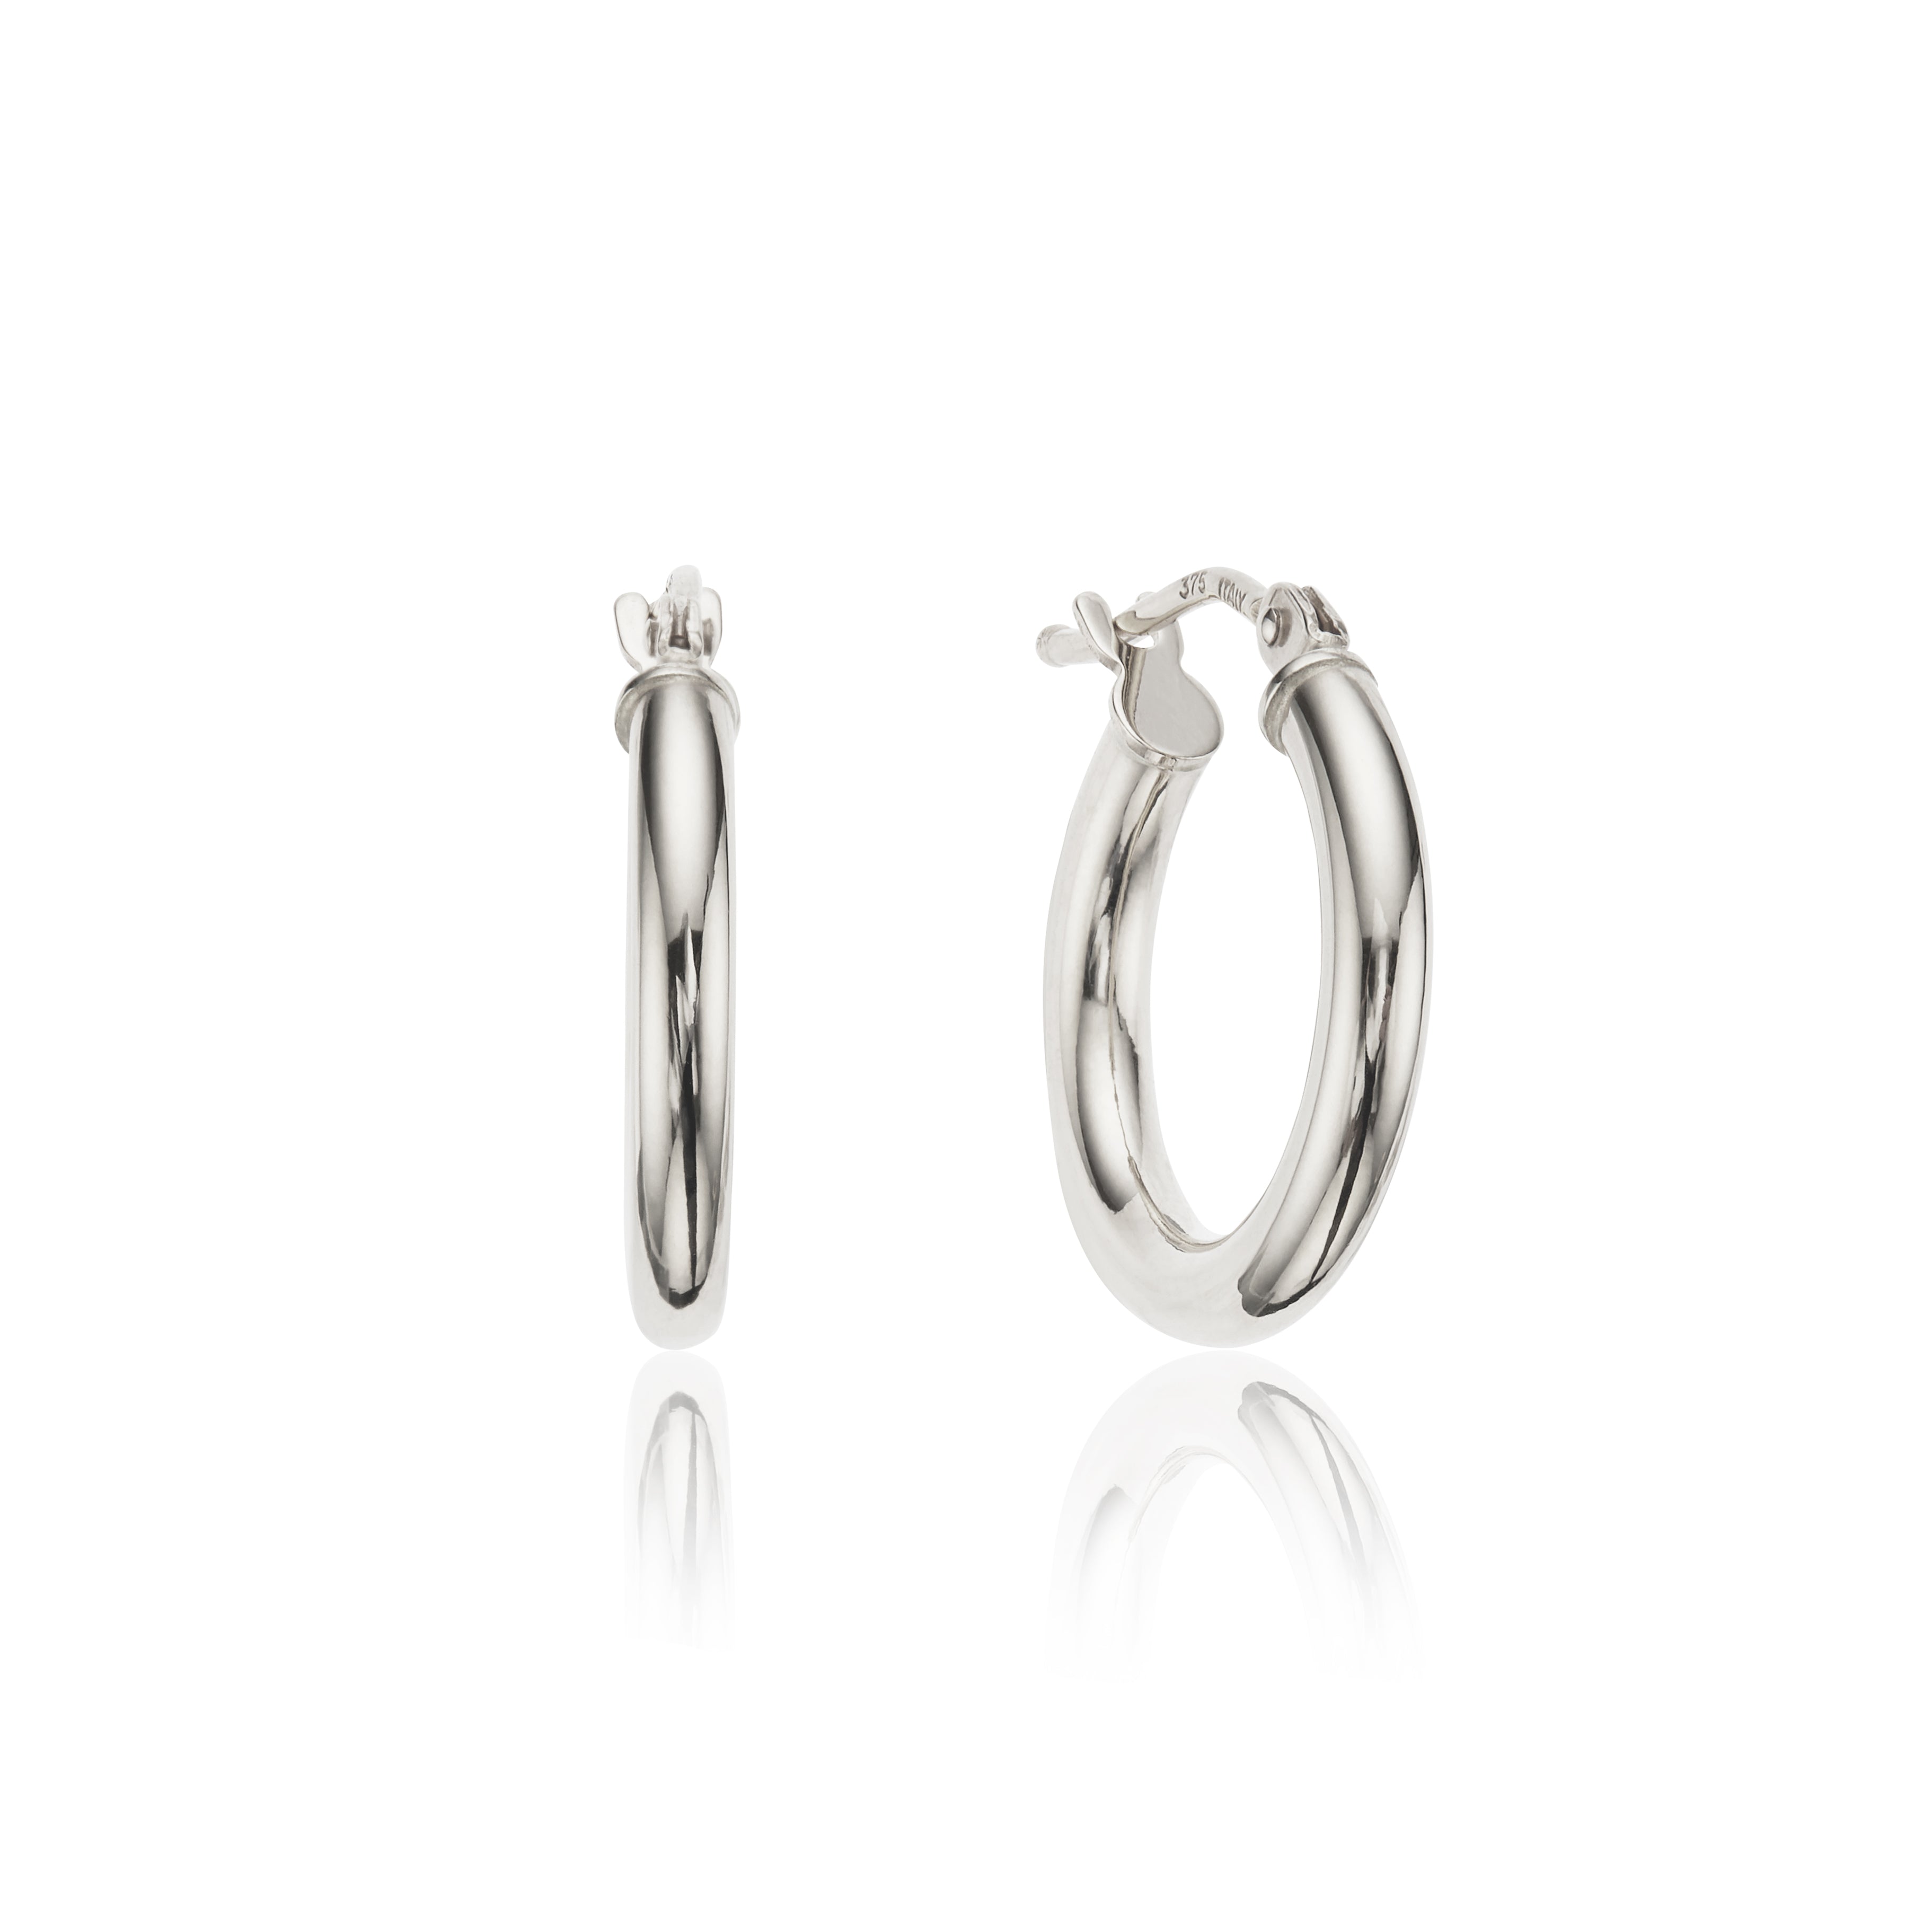 Silver small rounded hoop earrings on a white background